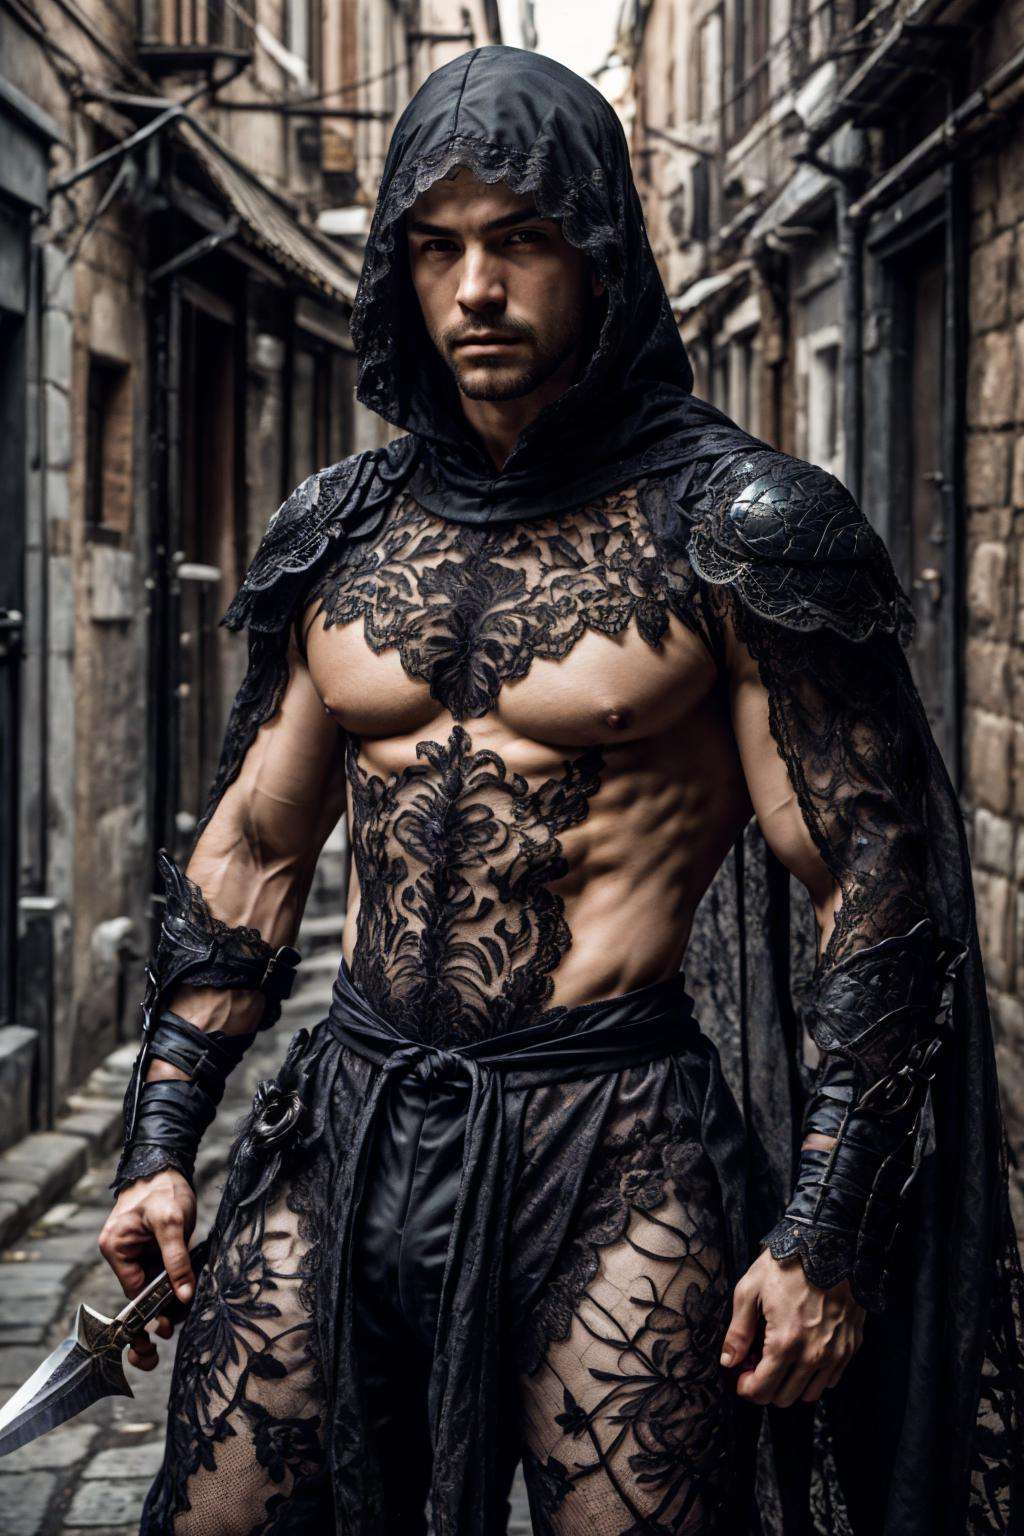 lac34rmor, wearing black lace rogue armor, see-through, ((dynamic pose)), ((fighting stance)), close up, portrait, medieval fantasy city background, holding dagger, lace cloak, street, alley, pants, realistic, masterpiece, intricate details, detailed background, depth of field, photo of a man,